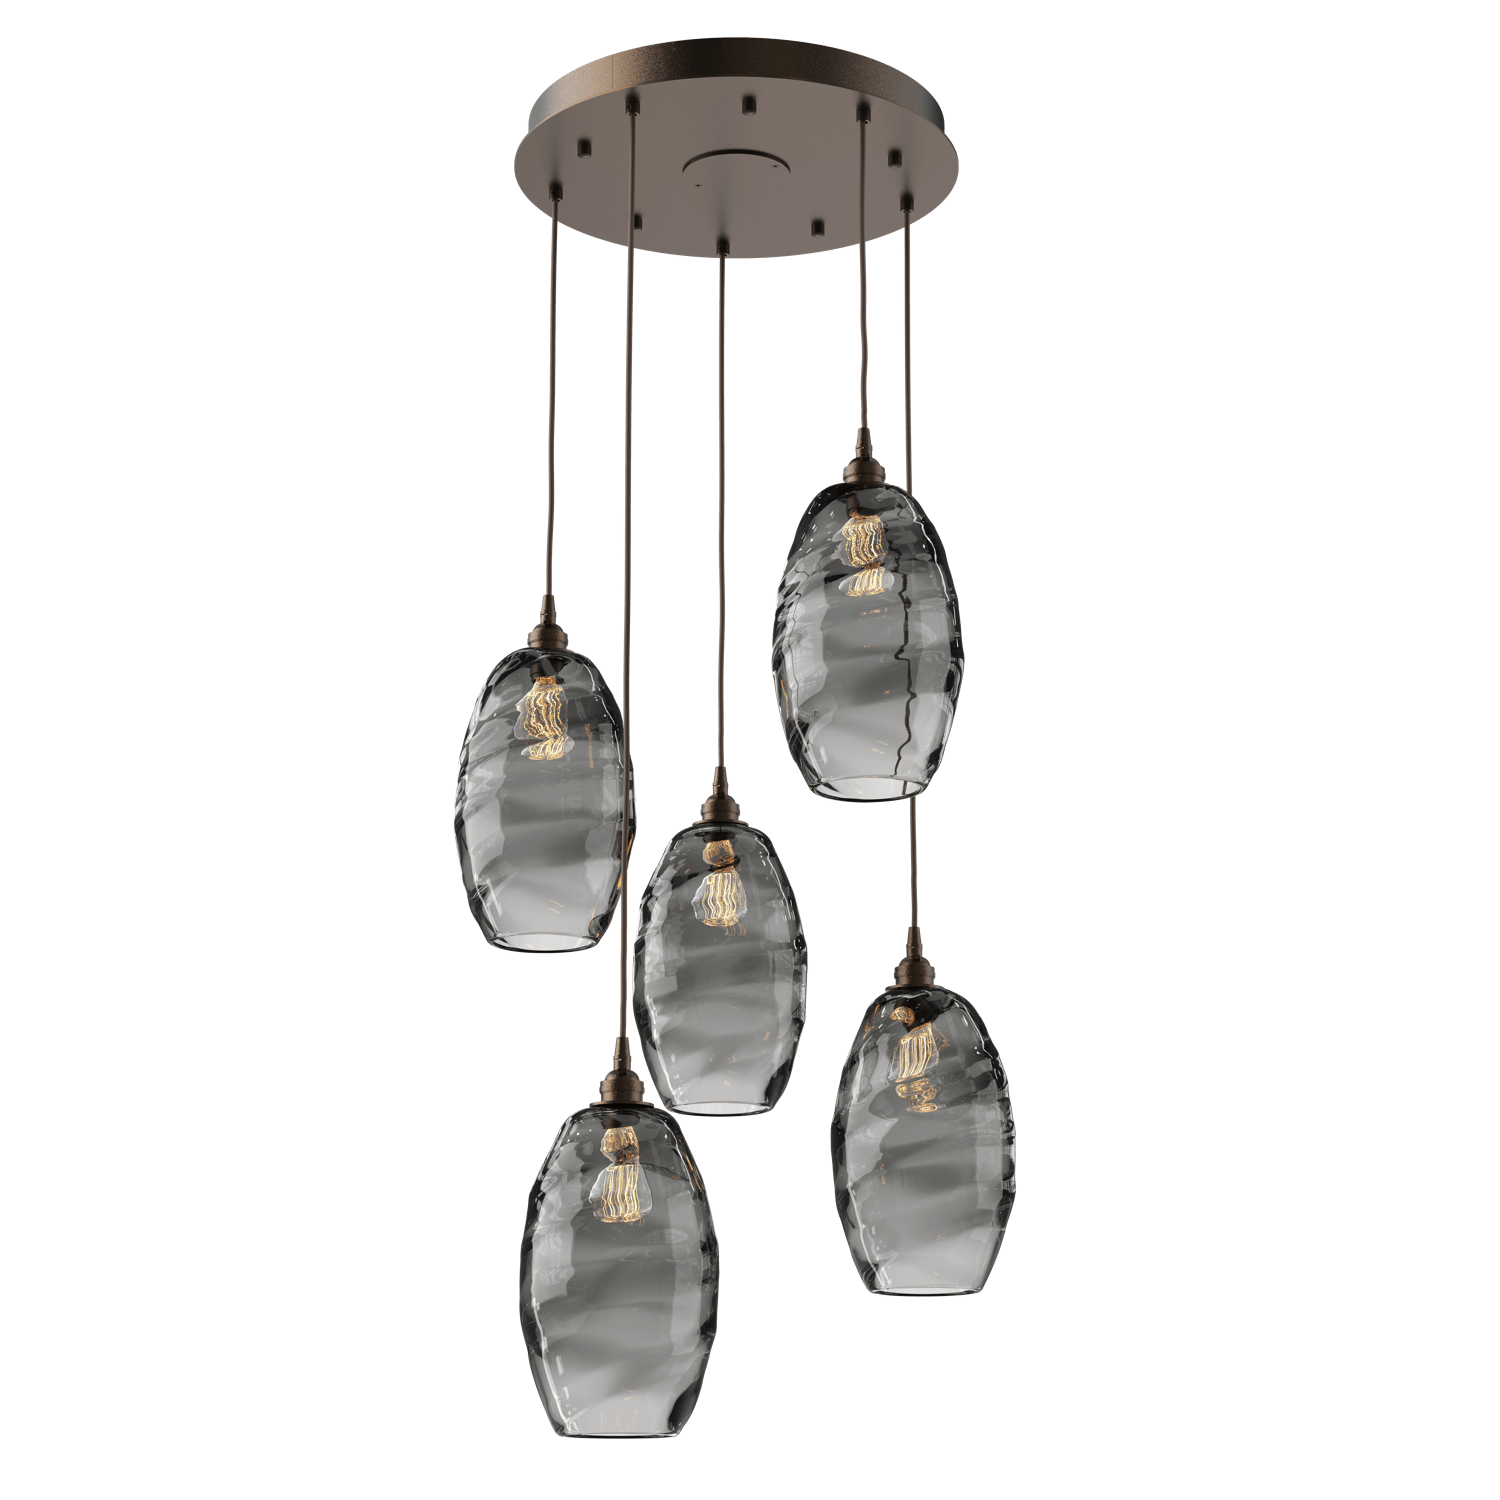 CHB0035-05-FB-OS-Hammerton-Studio-Optic-Blown-Glass-Elisse-5-light-round-pendant-chandelier-with-flat-bronze-finish-and-optic-smoke-blown-glass-shades-and-incandescent-lamping